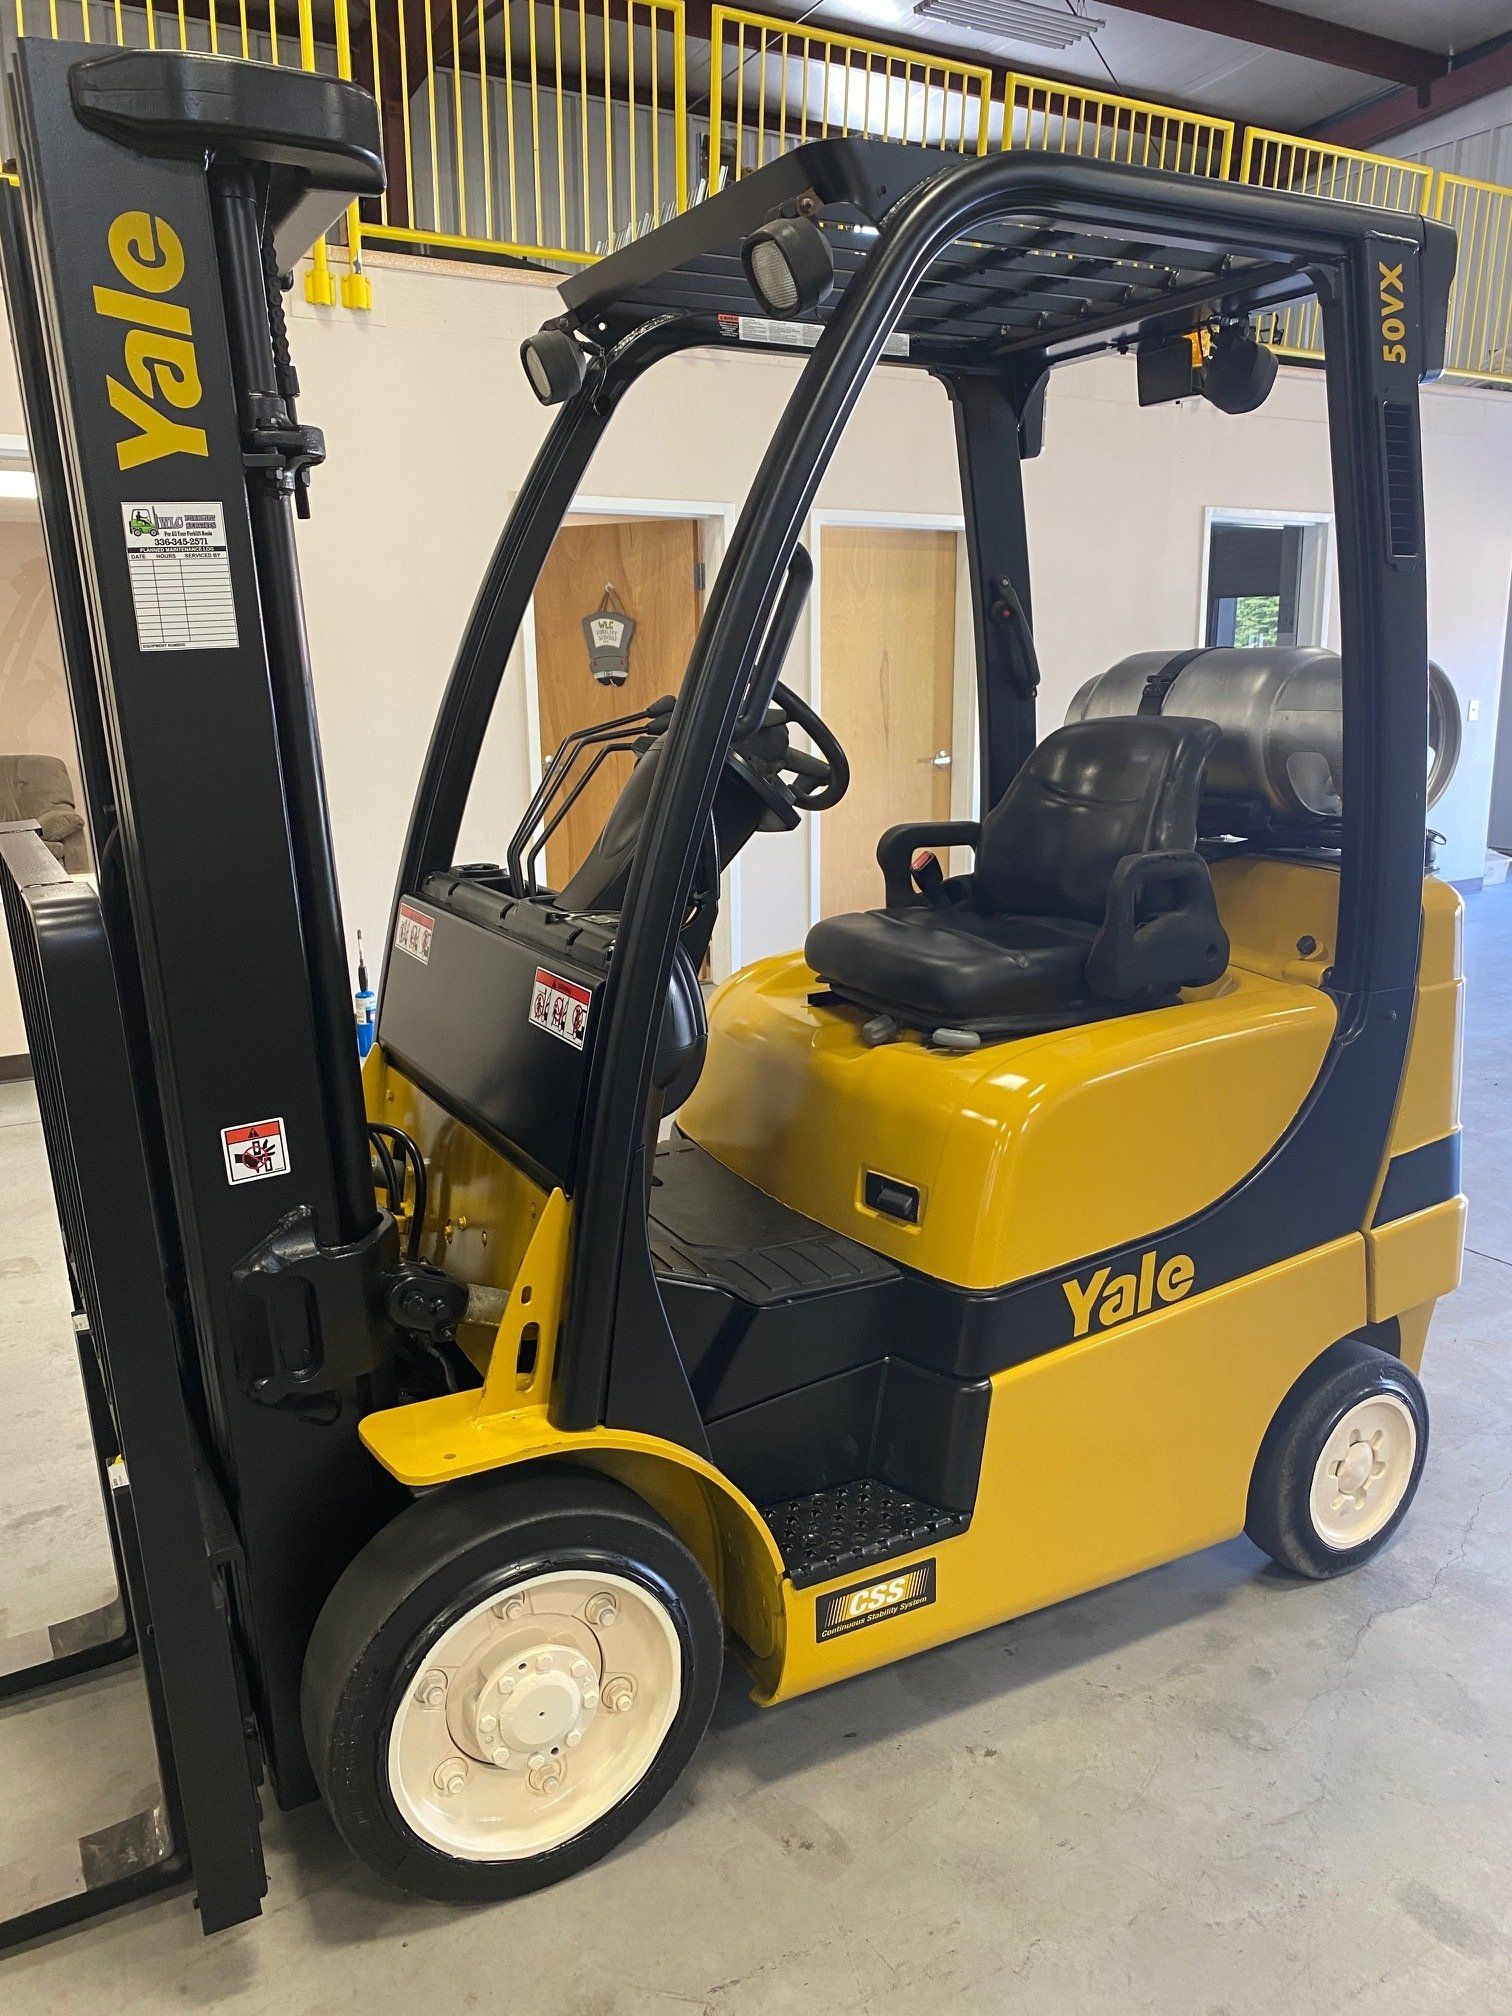 Yellow Yale Forklift for Rent in Greensboro, NC